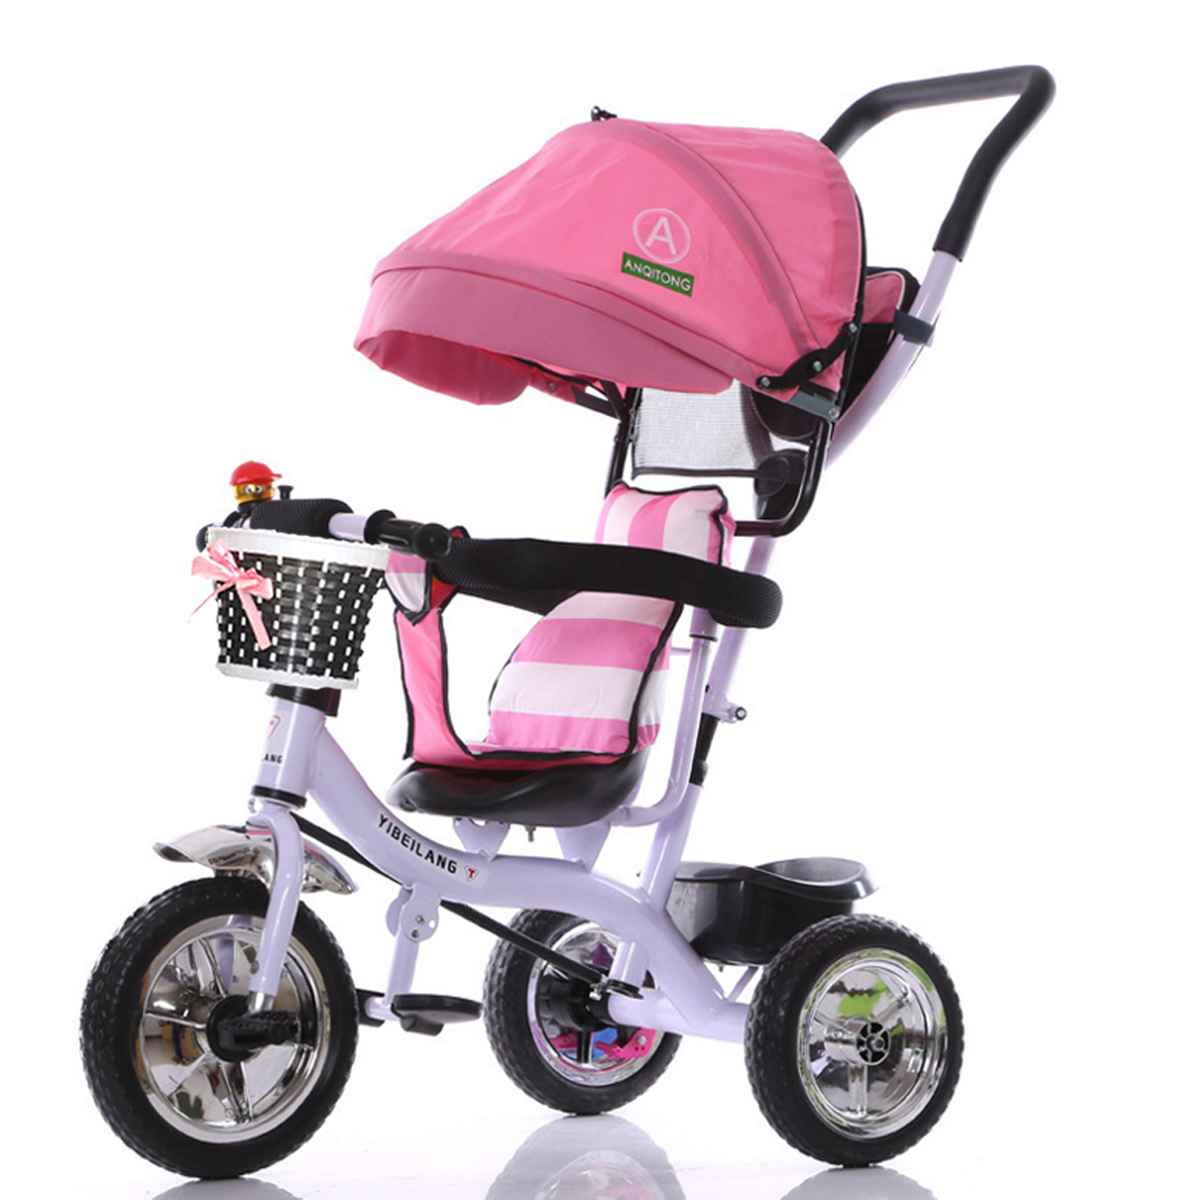 BIKIGHT-Kids-Tricycle-Bike-Children-3-Wheels-With-Shade-Toddler-Balance-Protection-Baby-Cholley-Mini-1340506